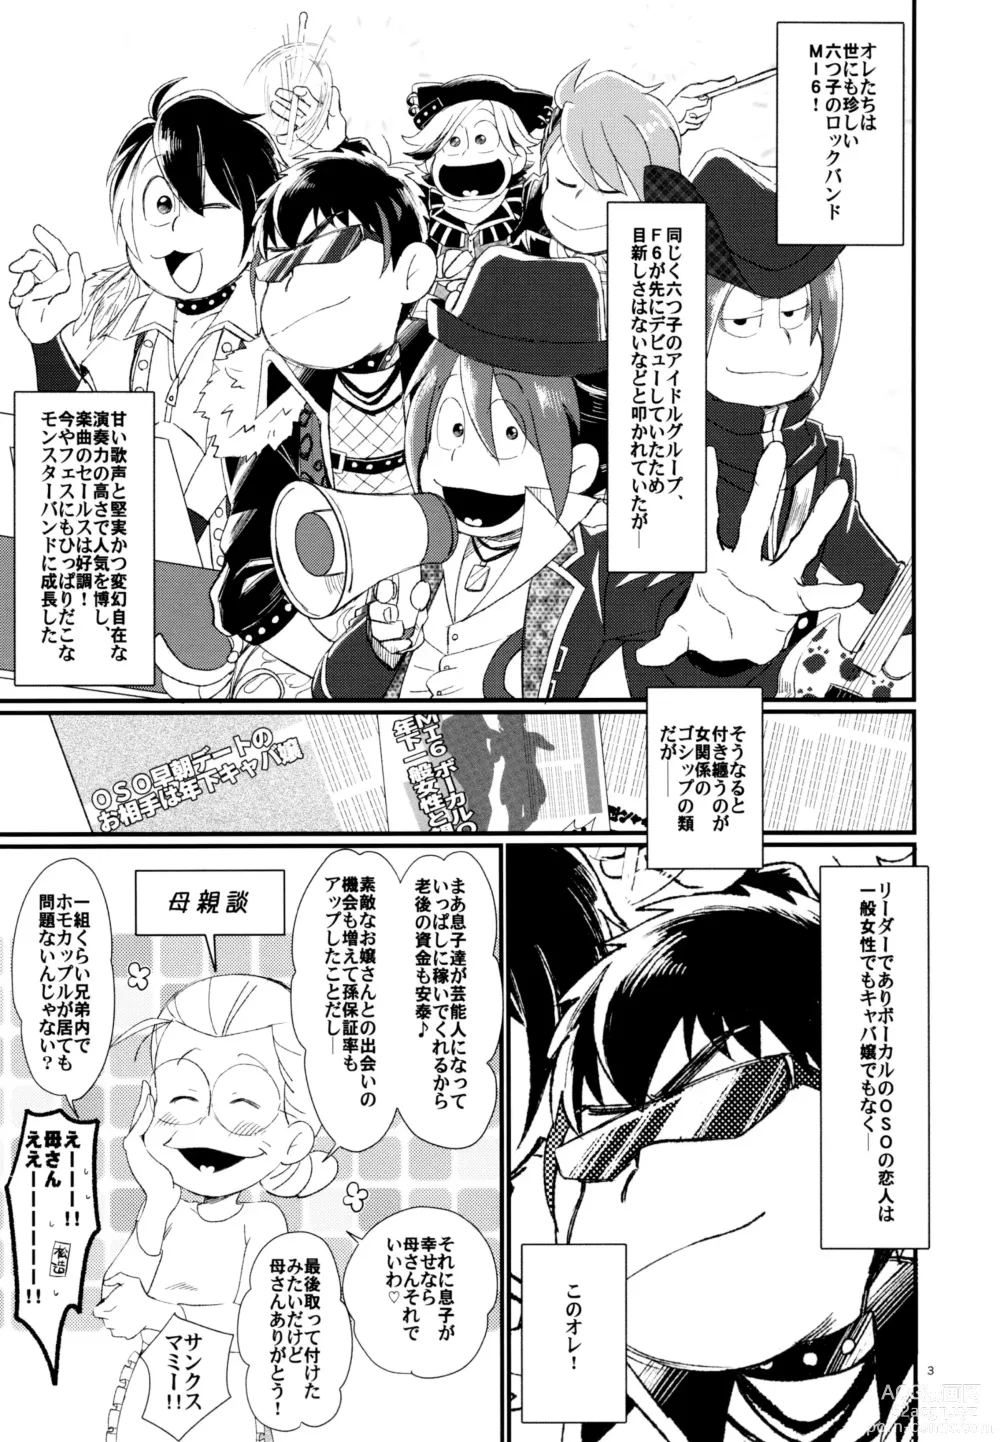 Page 3 of doujinshi A book where OSO seals away the pain of Kara and graduates from virginity.